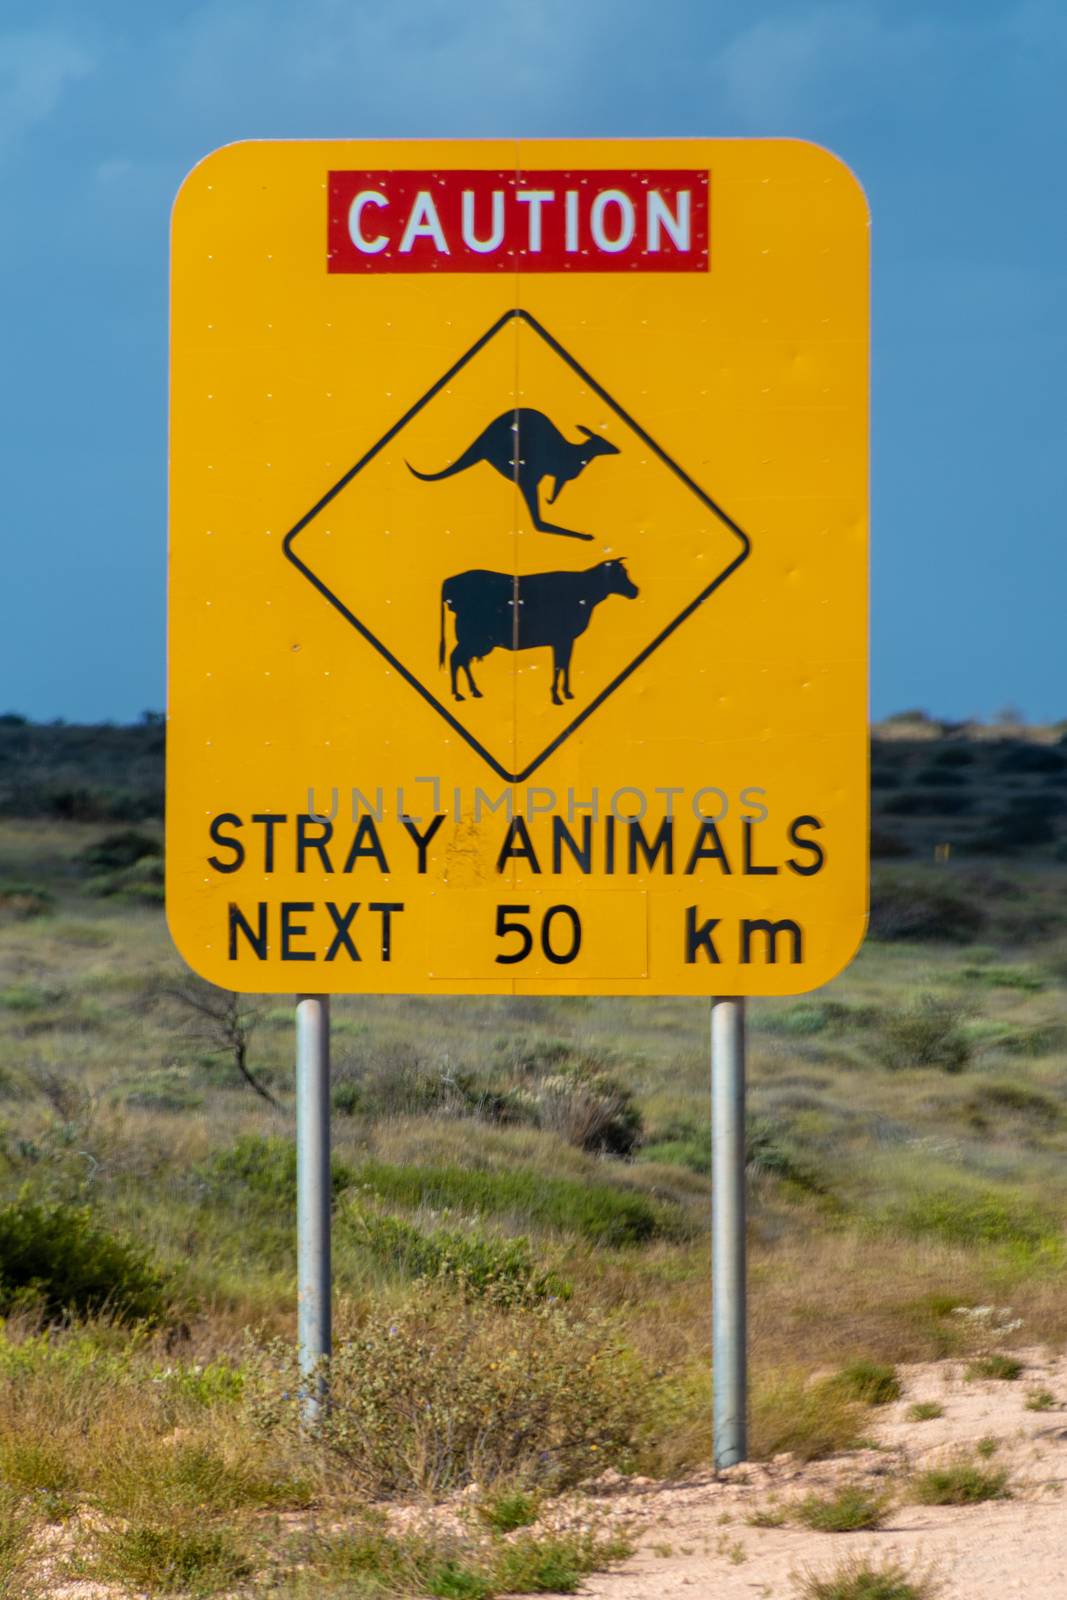 Caution stray animals next 50 km road sign in Australia by MXW_Stock